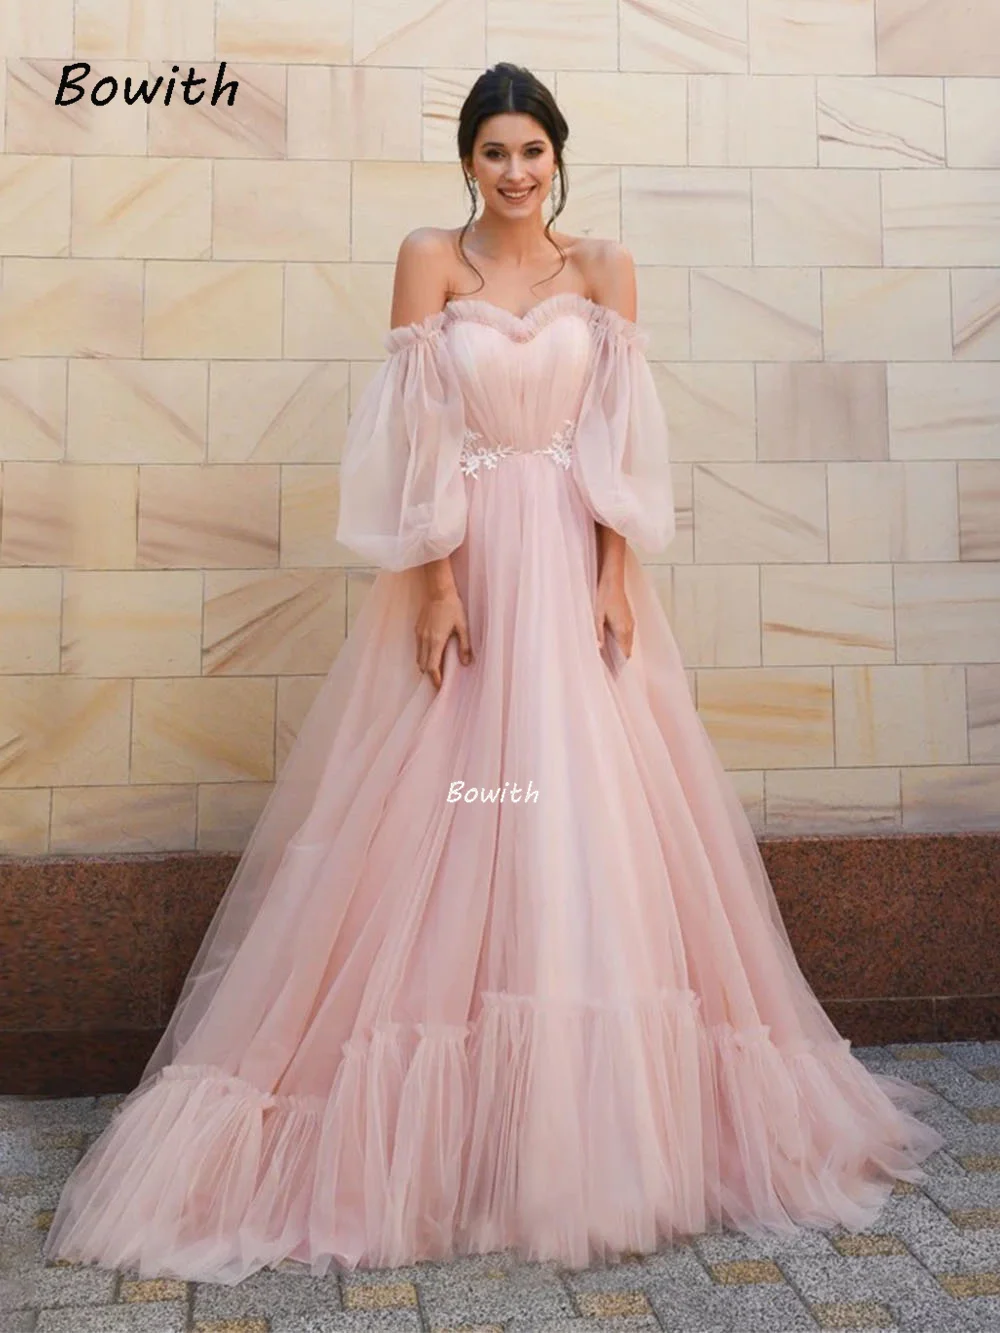 

Bowith Pink Evening Dresses Formal Party Gown for Women Maxi Celebrity Dress Elegant Puffy Party Dress Long vestidos de fiesta